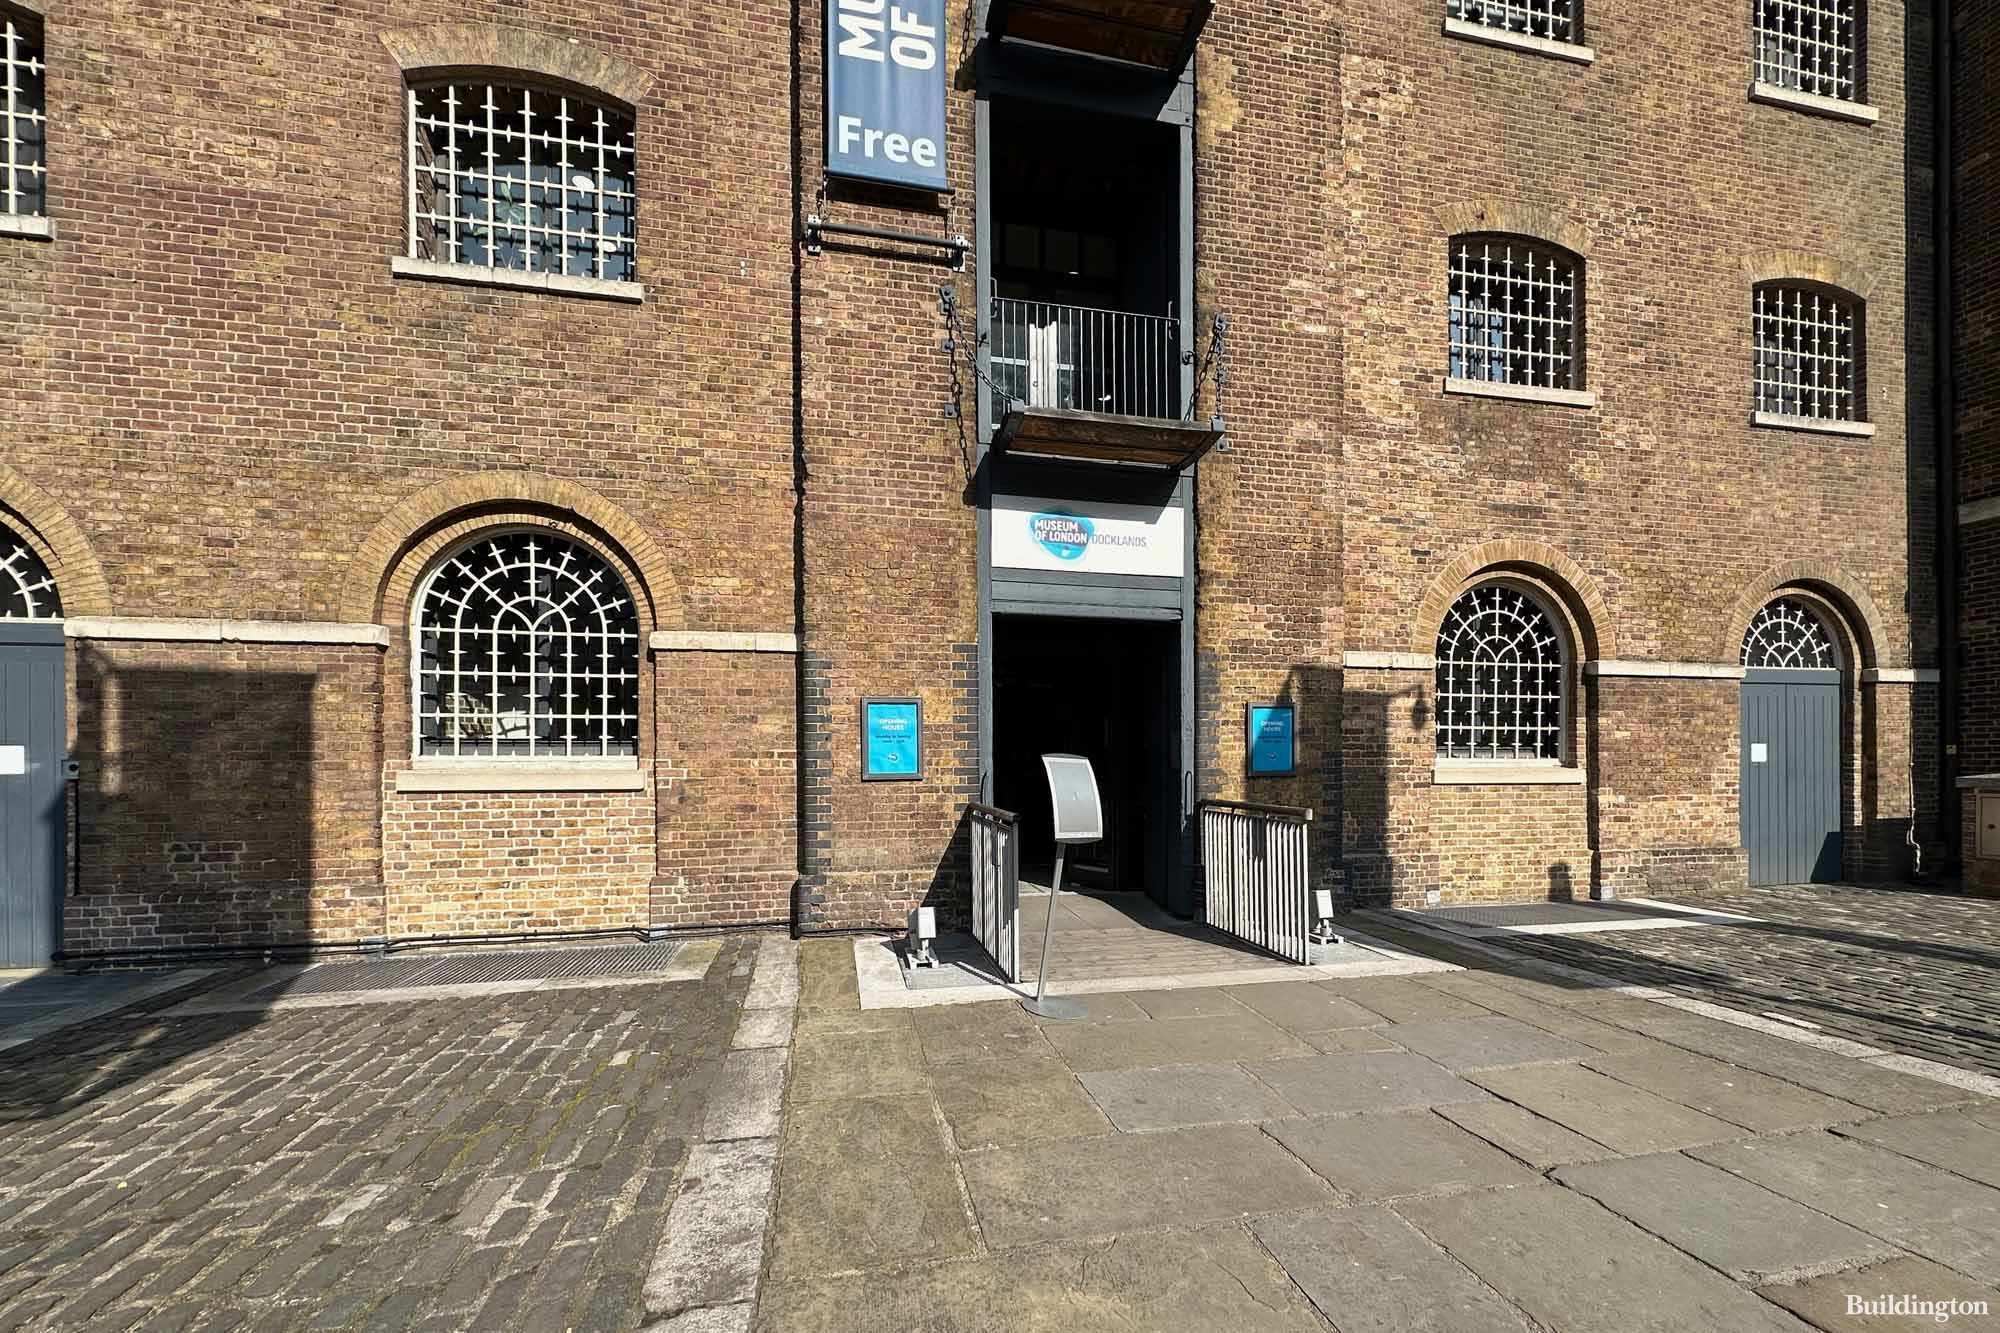 Museum of London Docklands building on West India Quay in London E14.